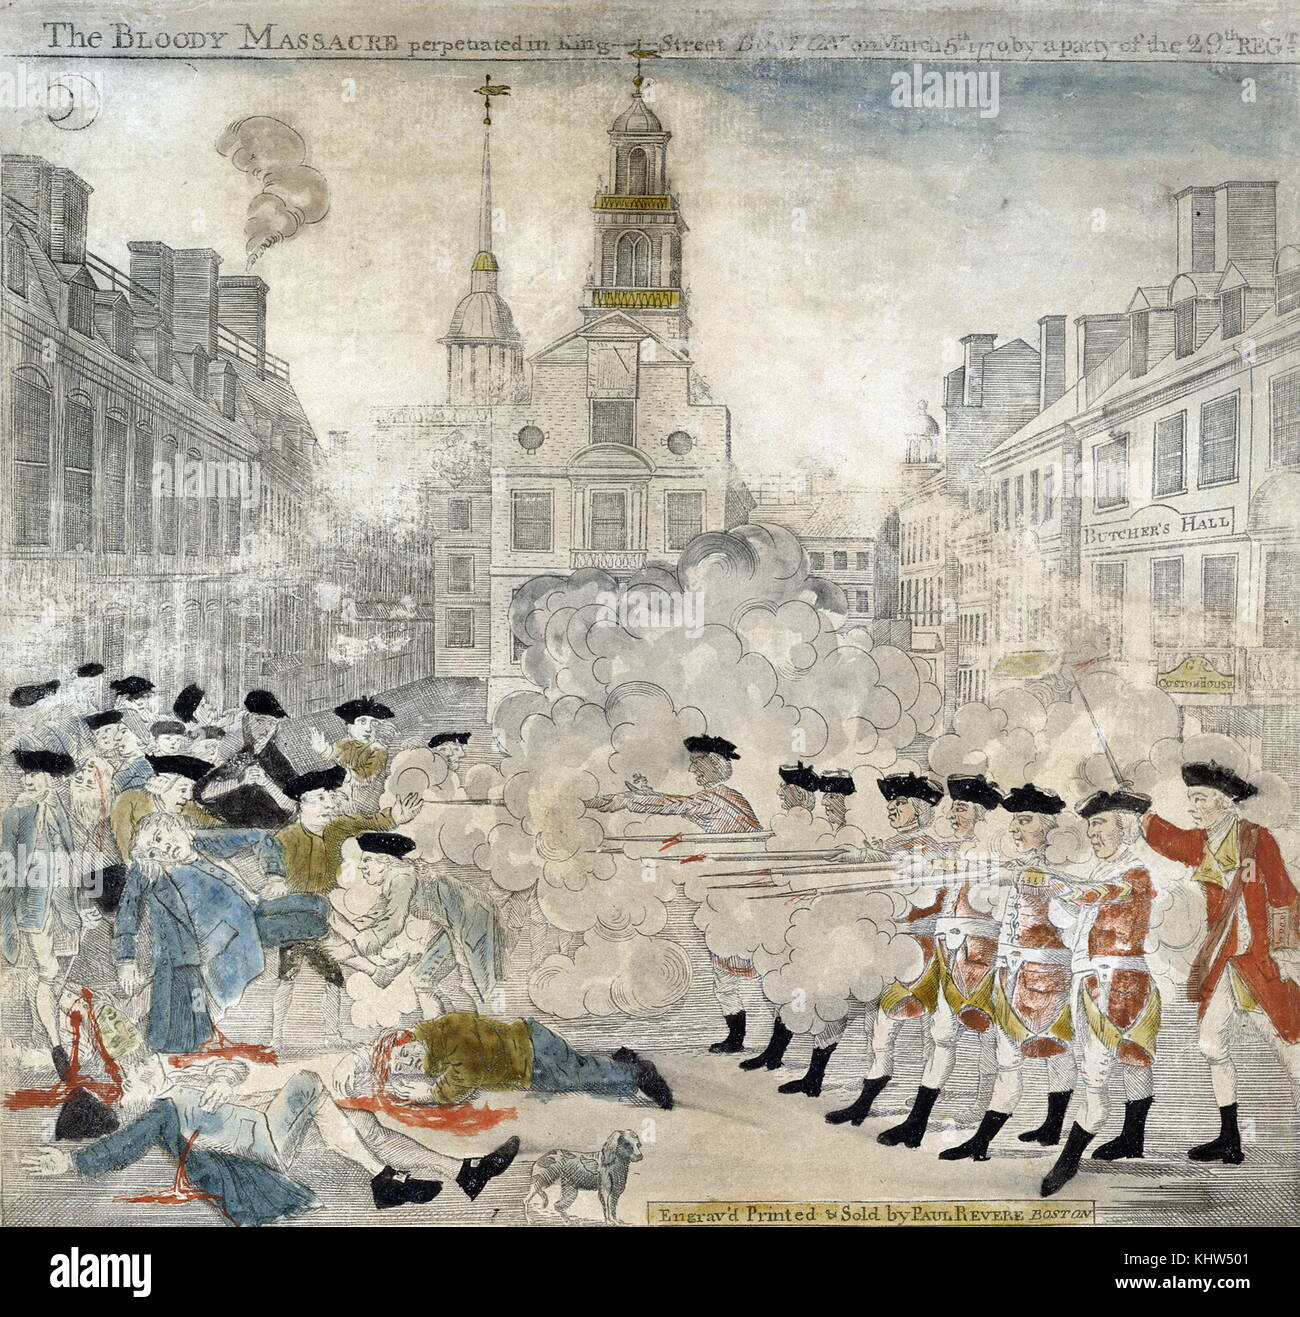 Engraving with watercolour depicting a sensationalised portrayal of the skirmish, later to become know as the Boston Massacre', between British soldiers and citizens of Boston on March 5, 17770. On the right is a group of seven uniformed soldiers, on the signal of an officer, fire into a crowd of civilians on the left. Three of the latter lie bleeding on the ground. Two other casualties have been lifted by the crowd. In the foreground is a dog; in the background are a row of houses, the First Church, and the Town House. Behind the British troops is another row of buildings. Stock Photo